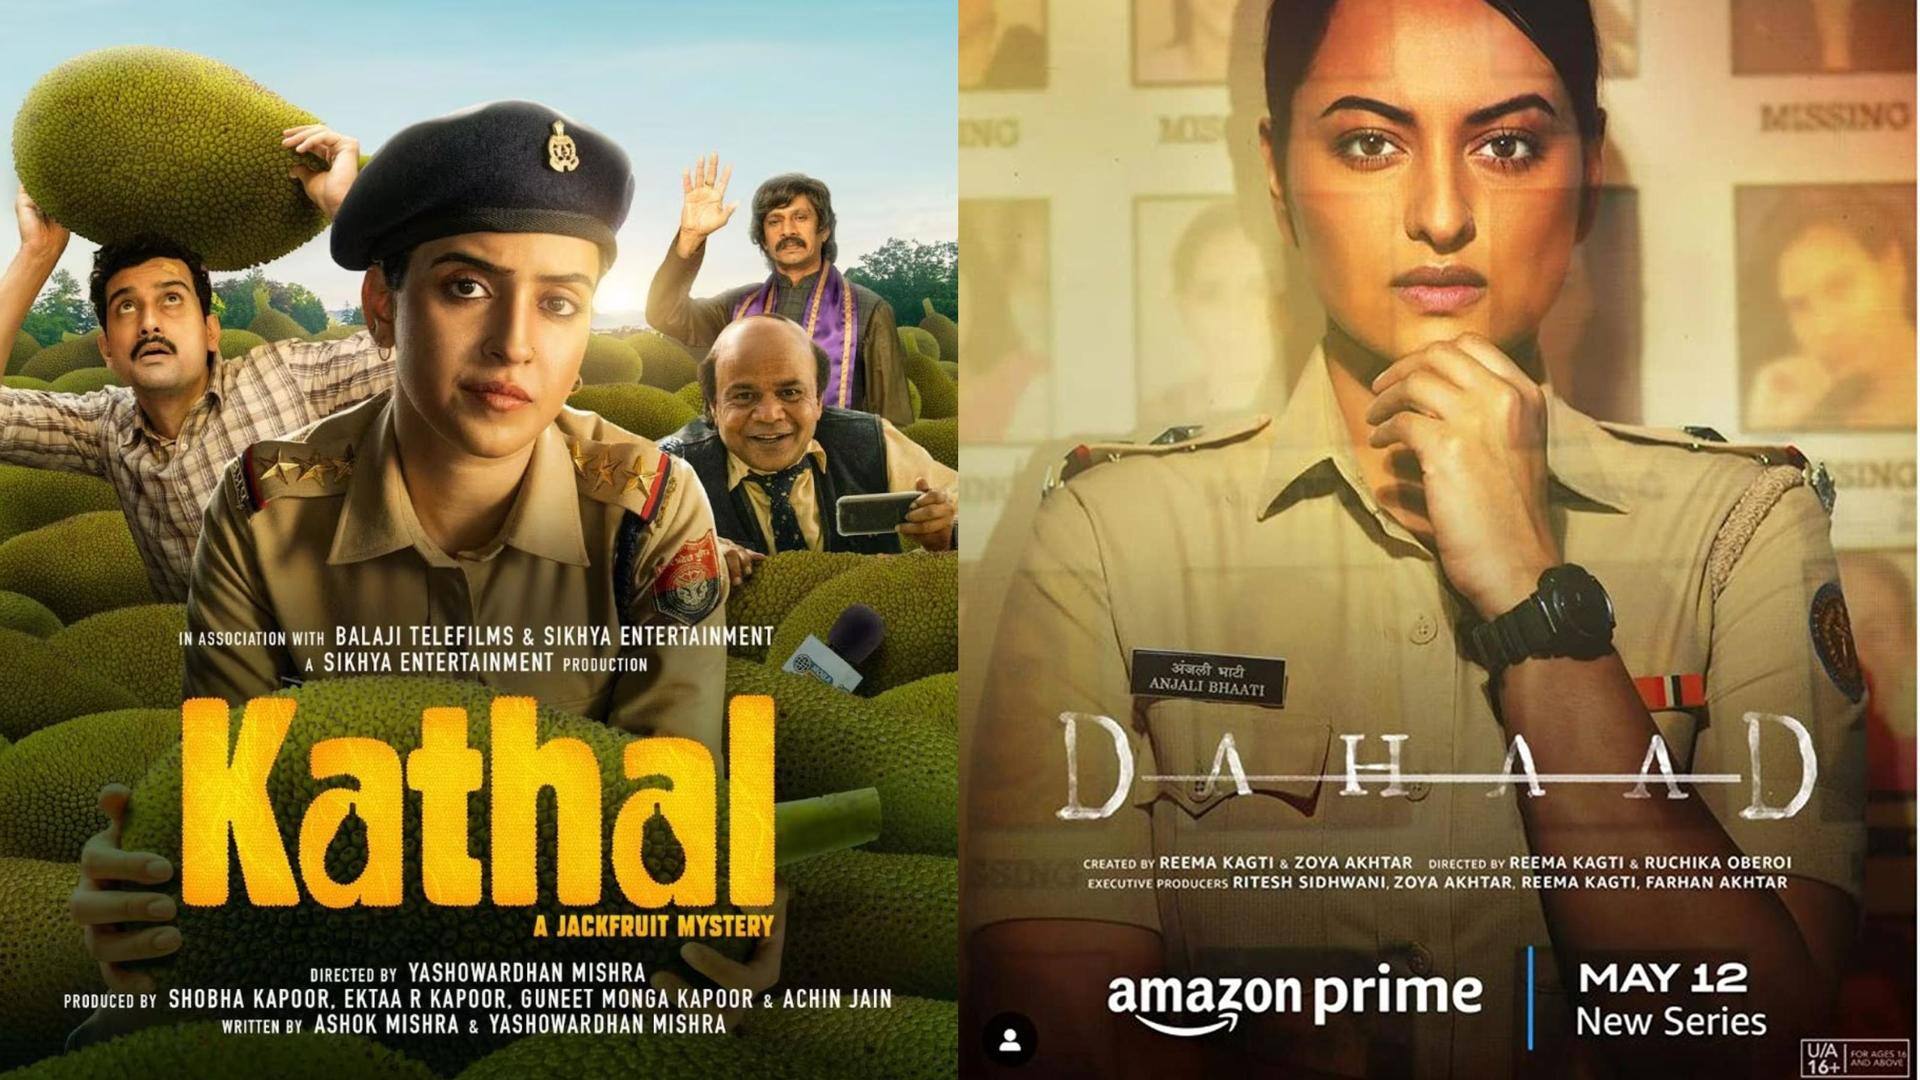 'Kathal,' 'Bridgerton' spinoff: Major shows and films premiering in May